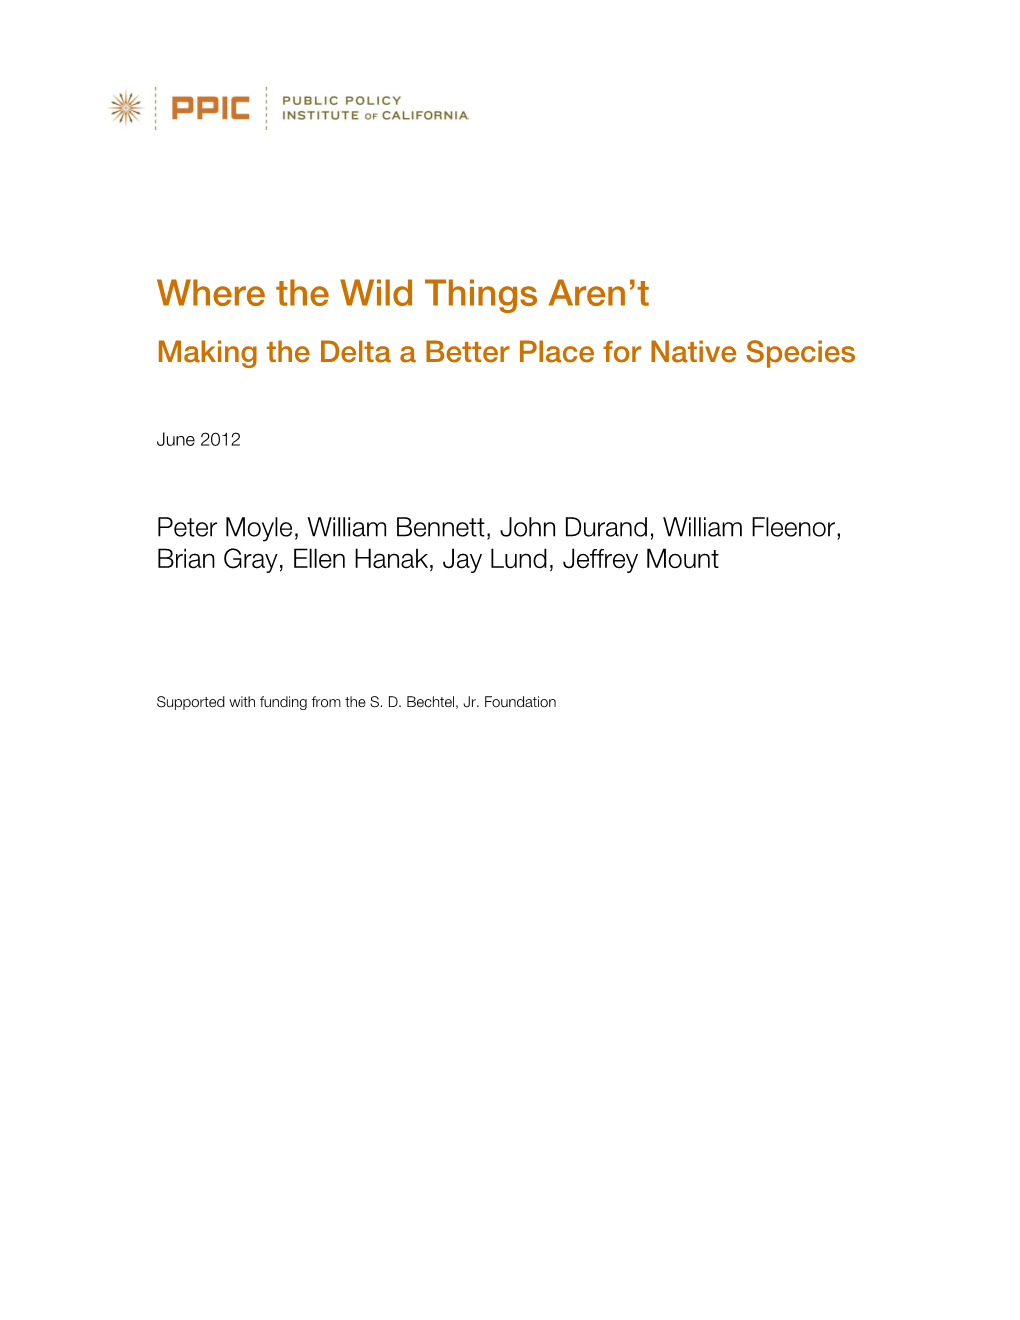 Making the Delta a Better Place for Native Species